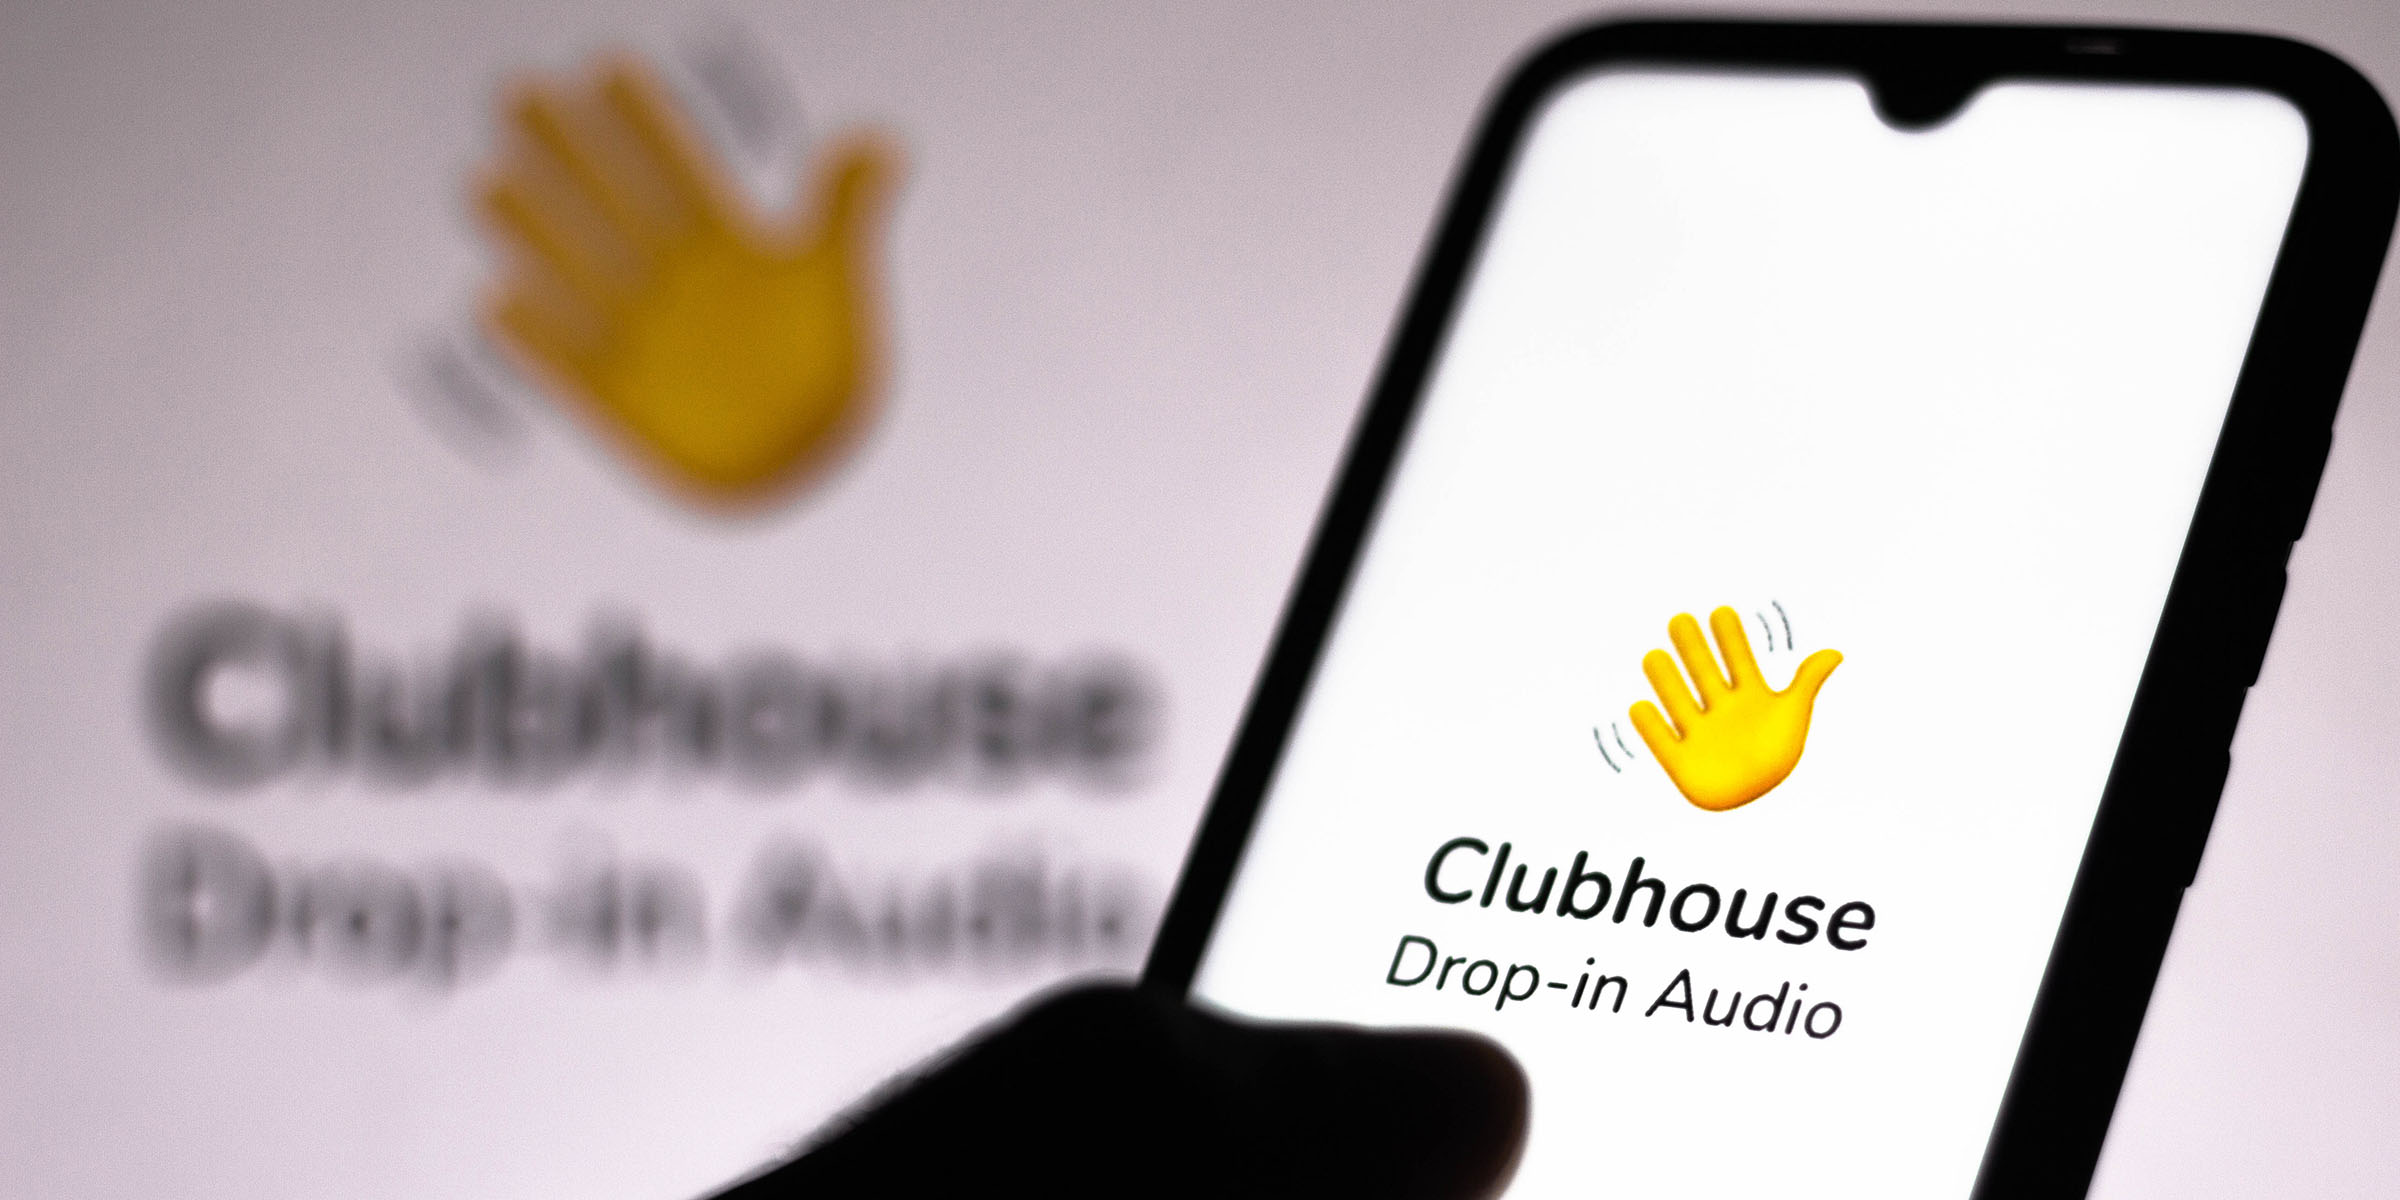 BRAZIL - 2021/02/08: In this photo illustration the Clubhouse logo seen displayed on a smartphone screen. (Photo Illustration by Rafael Henrique/SOPA Images/LightRocket via Getty Images)